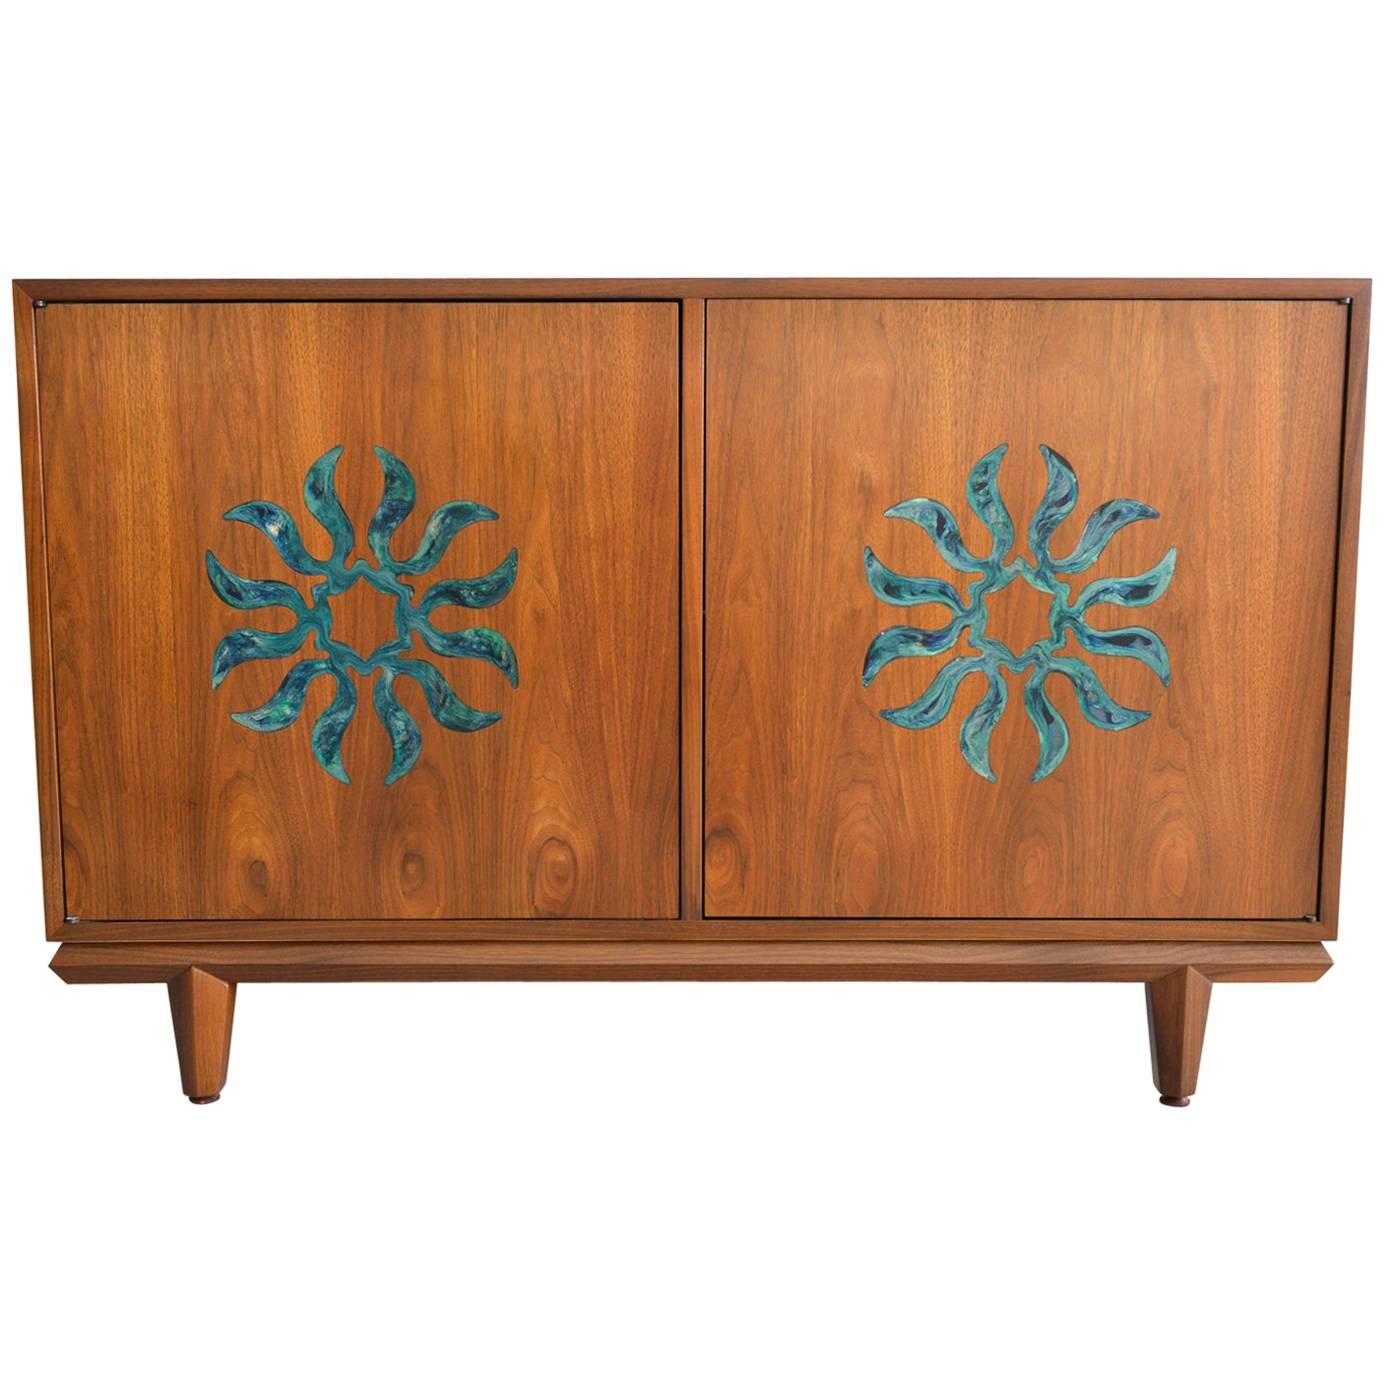 Walnut and Enameled Two-Door Dresser by Cal Mode, circa 1970